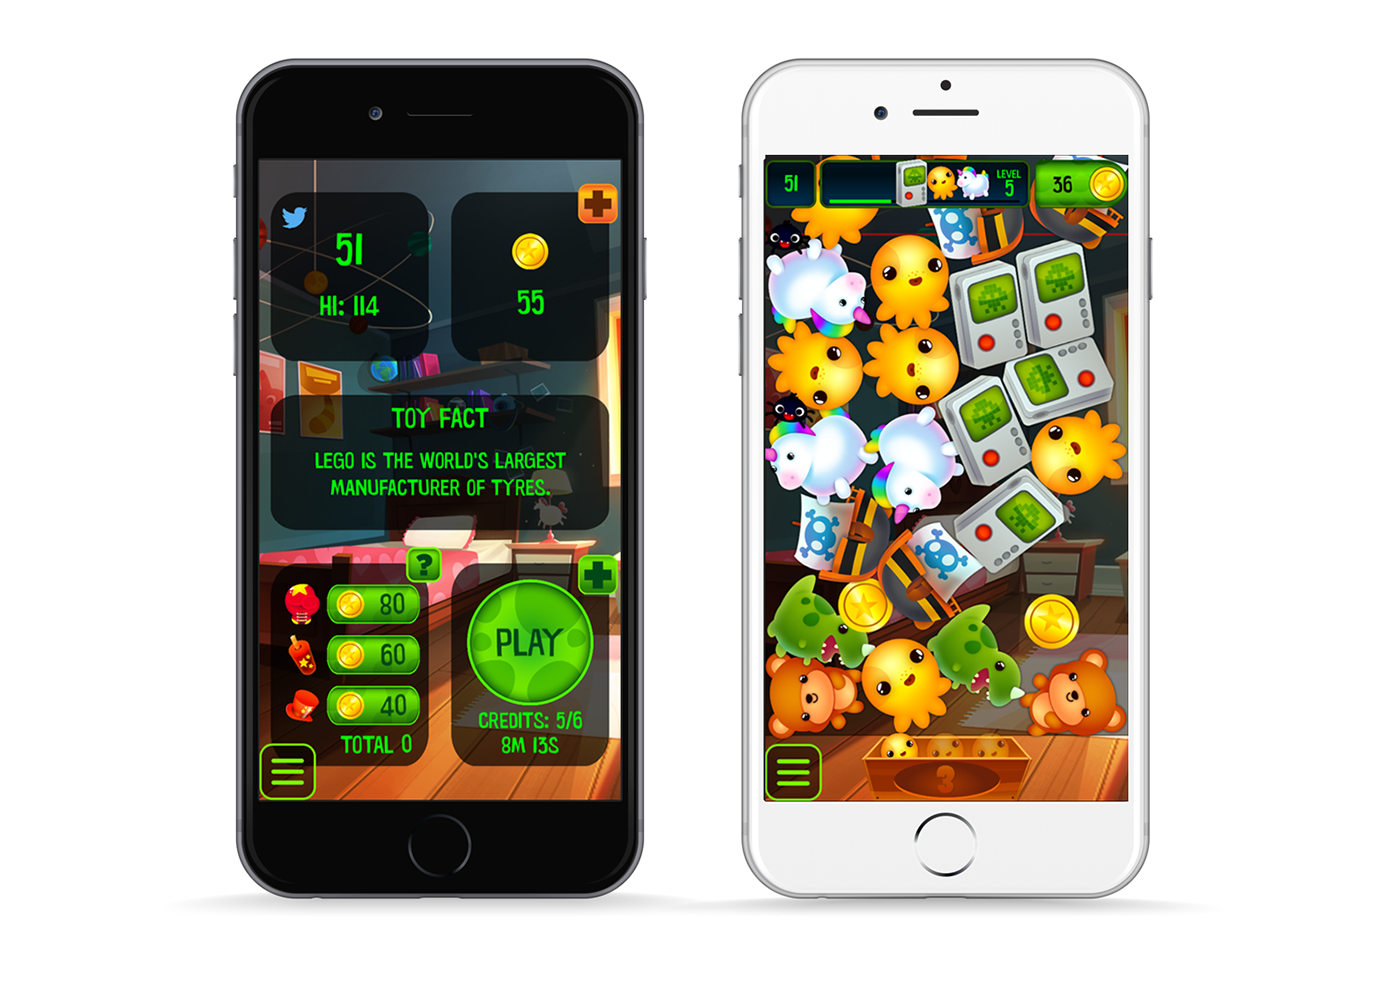 game design ILLUSTRATION  iphone app characters Halloween toys icons background